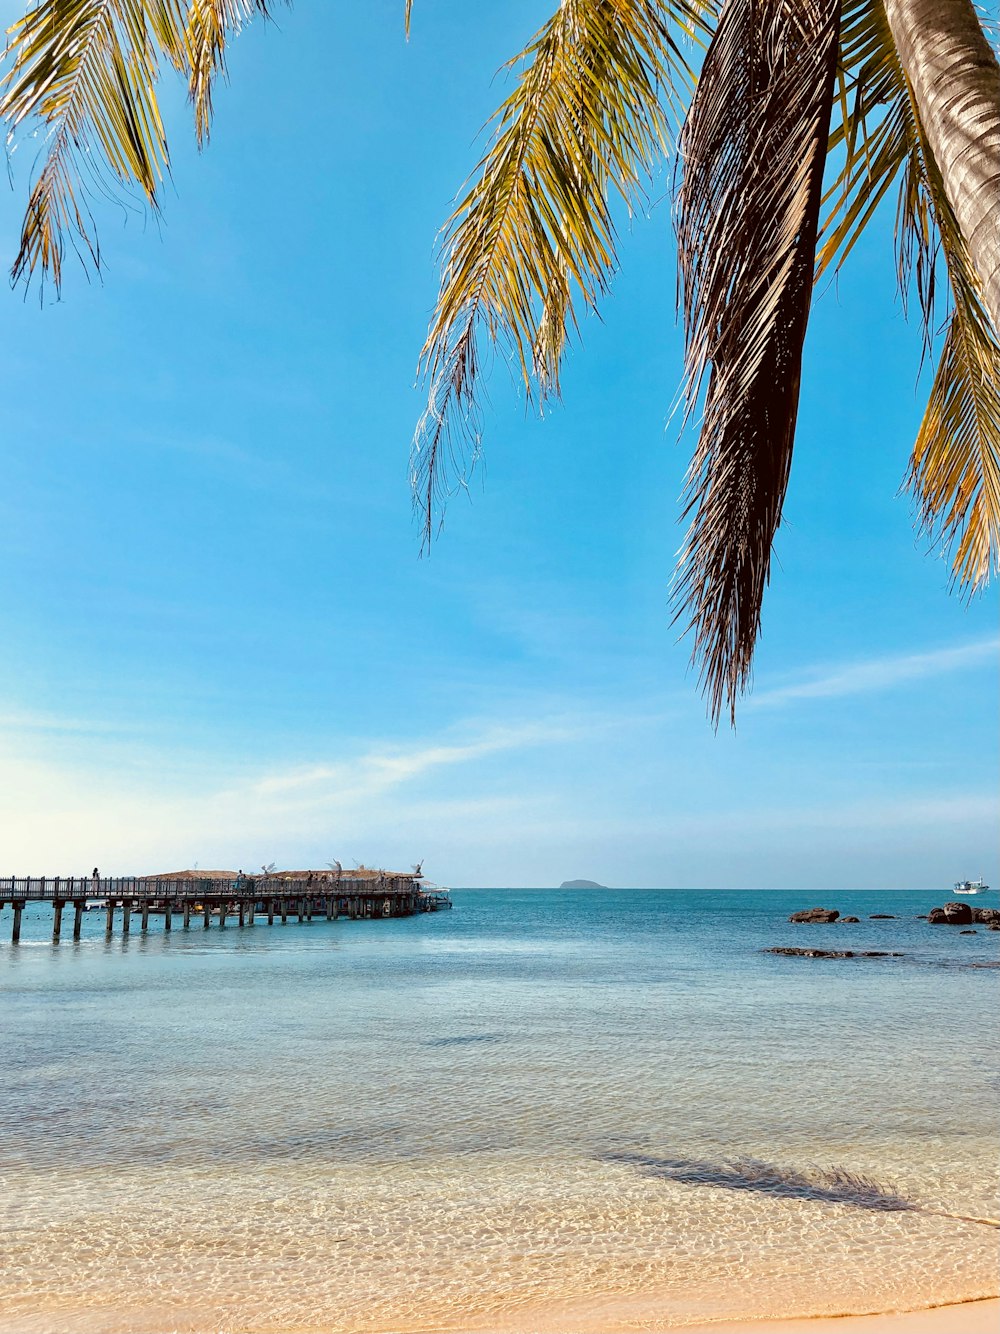 a beach with a pier and palm trees